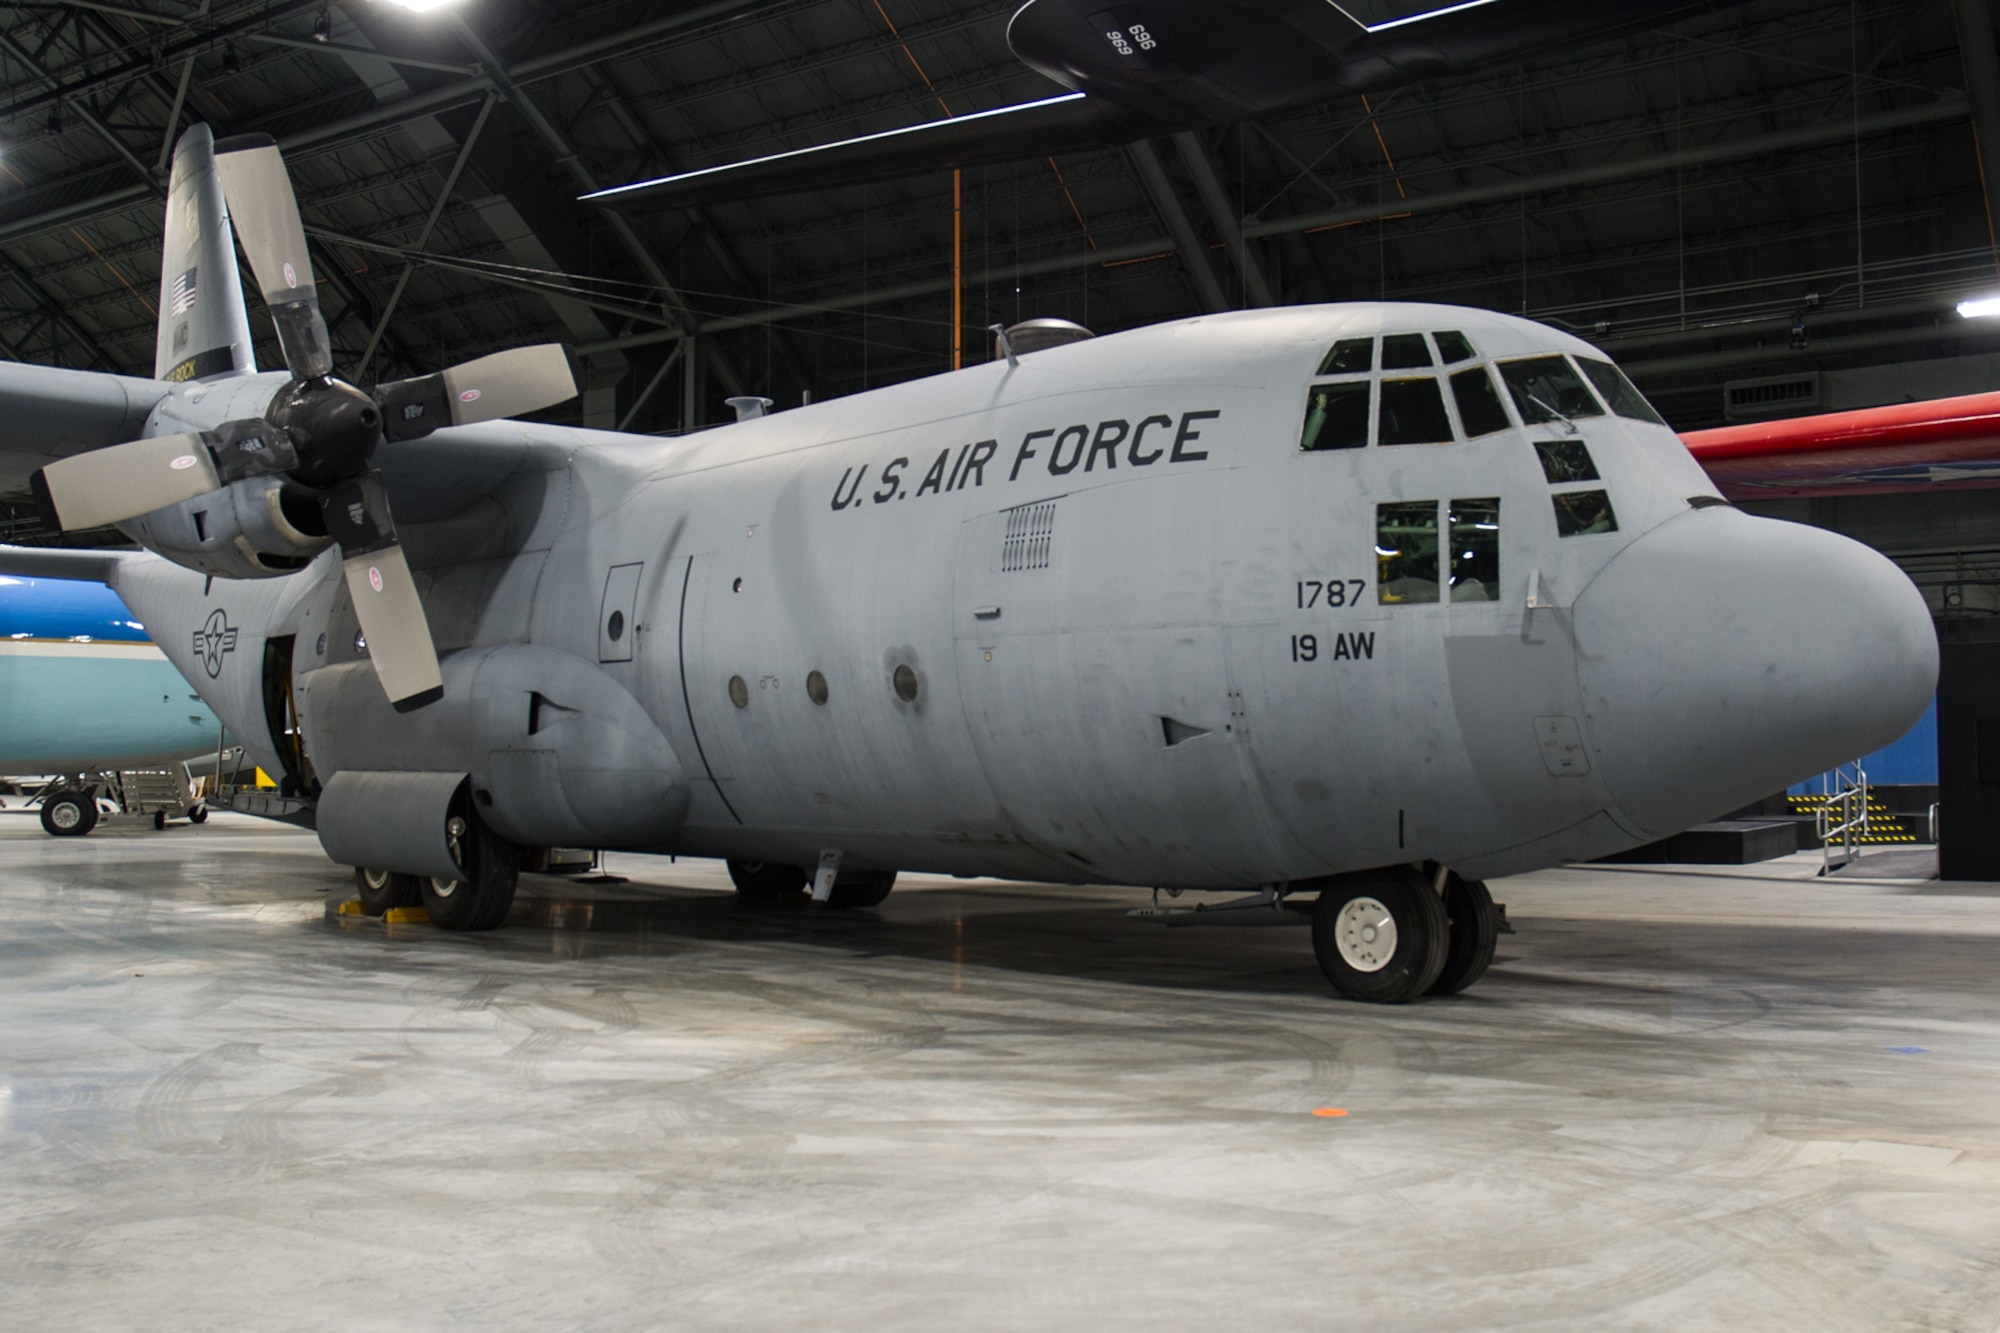 DAYTON, Ohio -- The Lockheed C-130E SPARE 617 on display in the Global Reach Gallery at the National Museum of the U.S. Air Force. (U.S. Air Force photo by Ken LaRock)